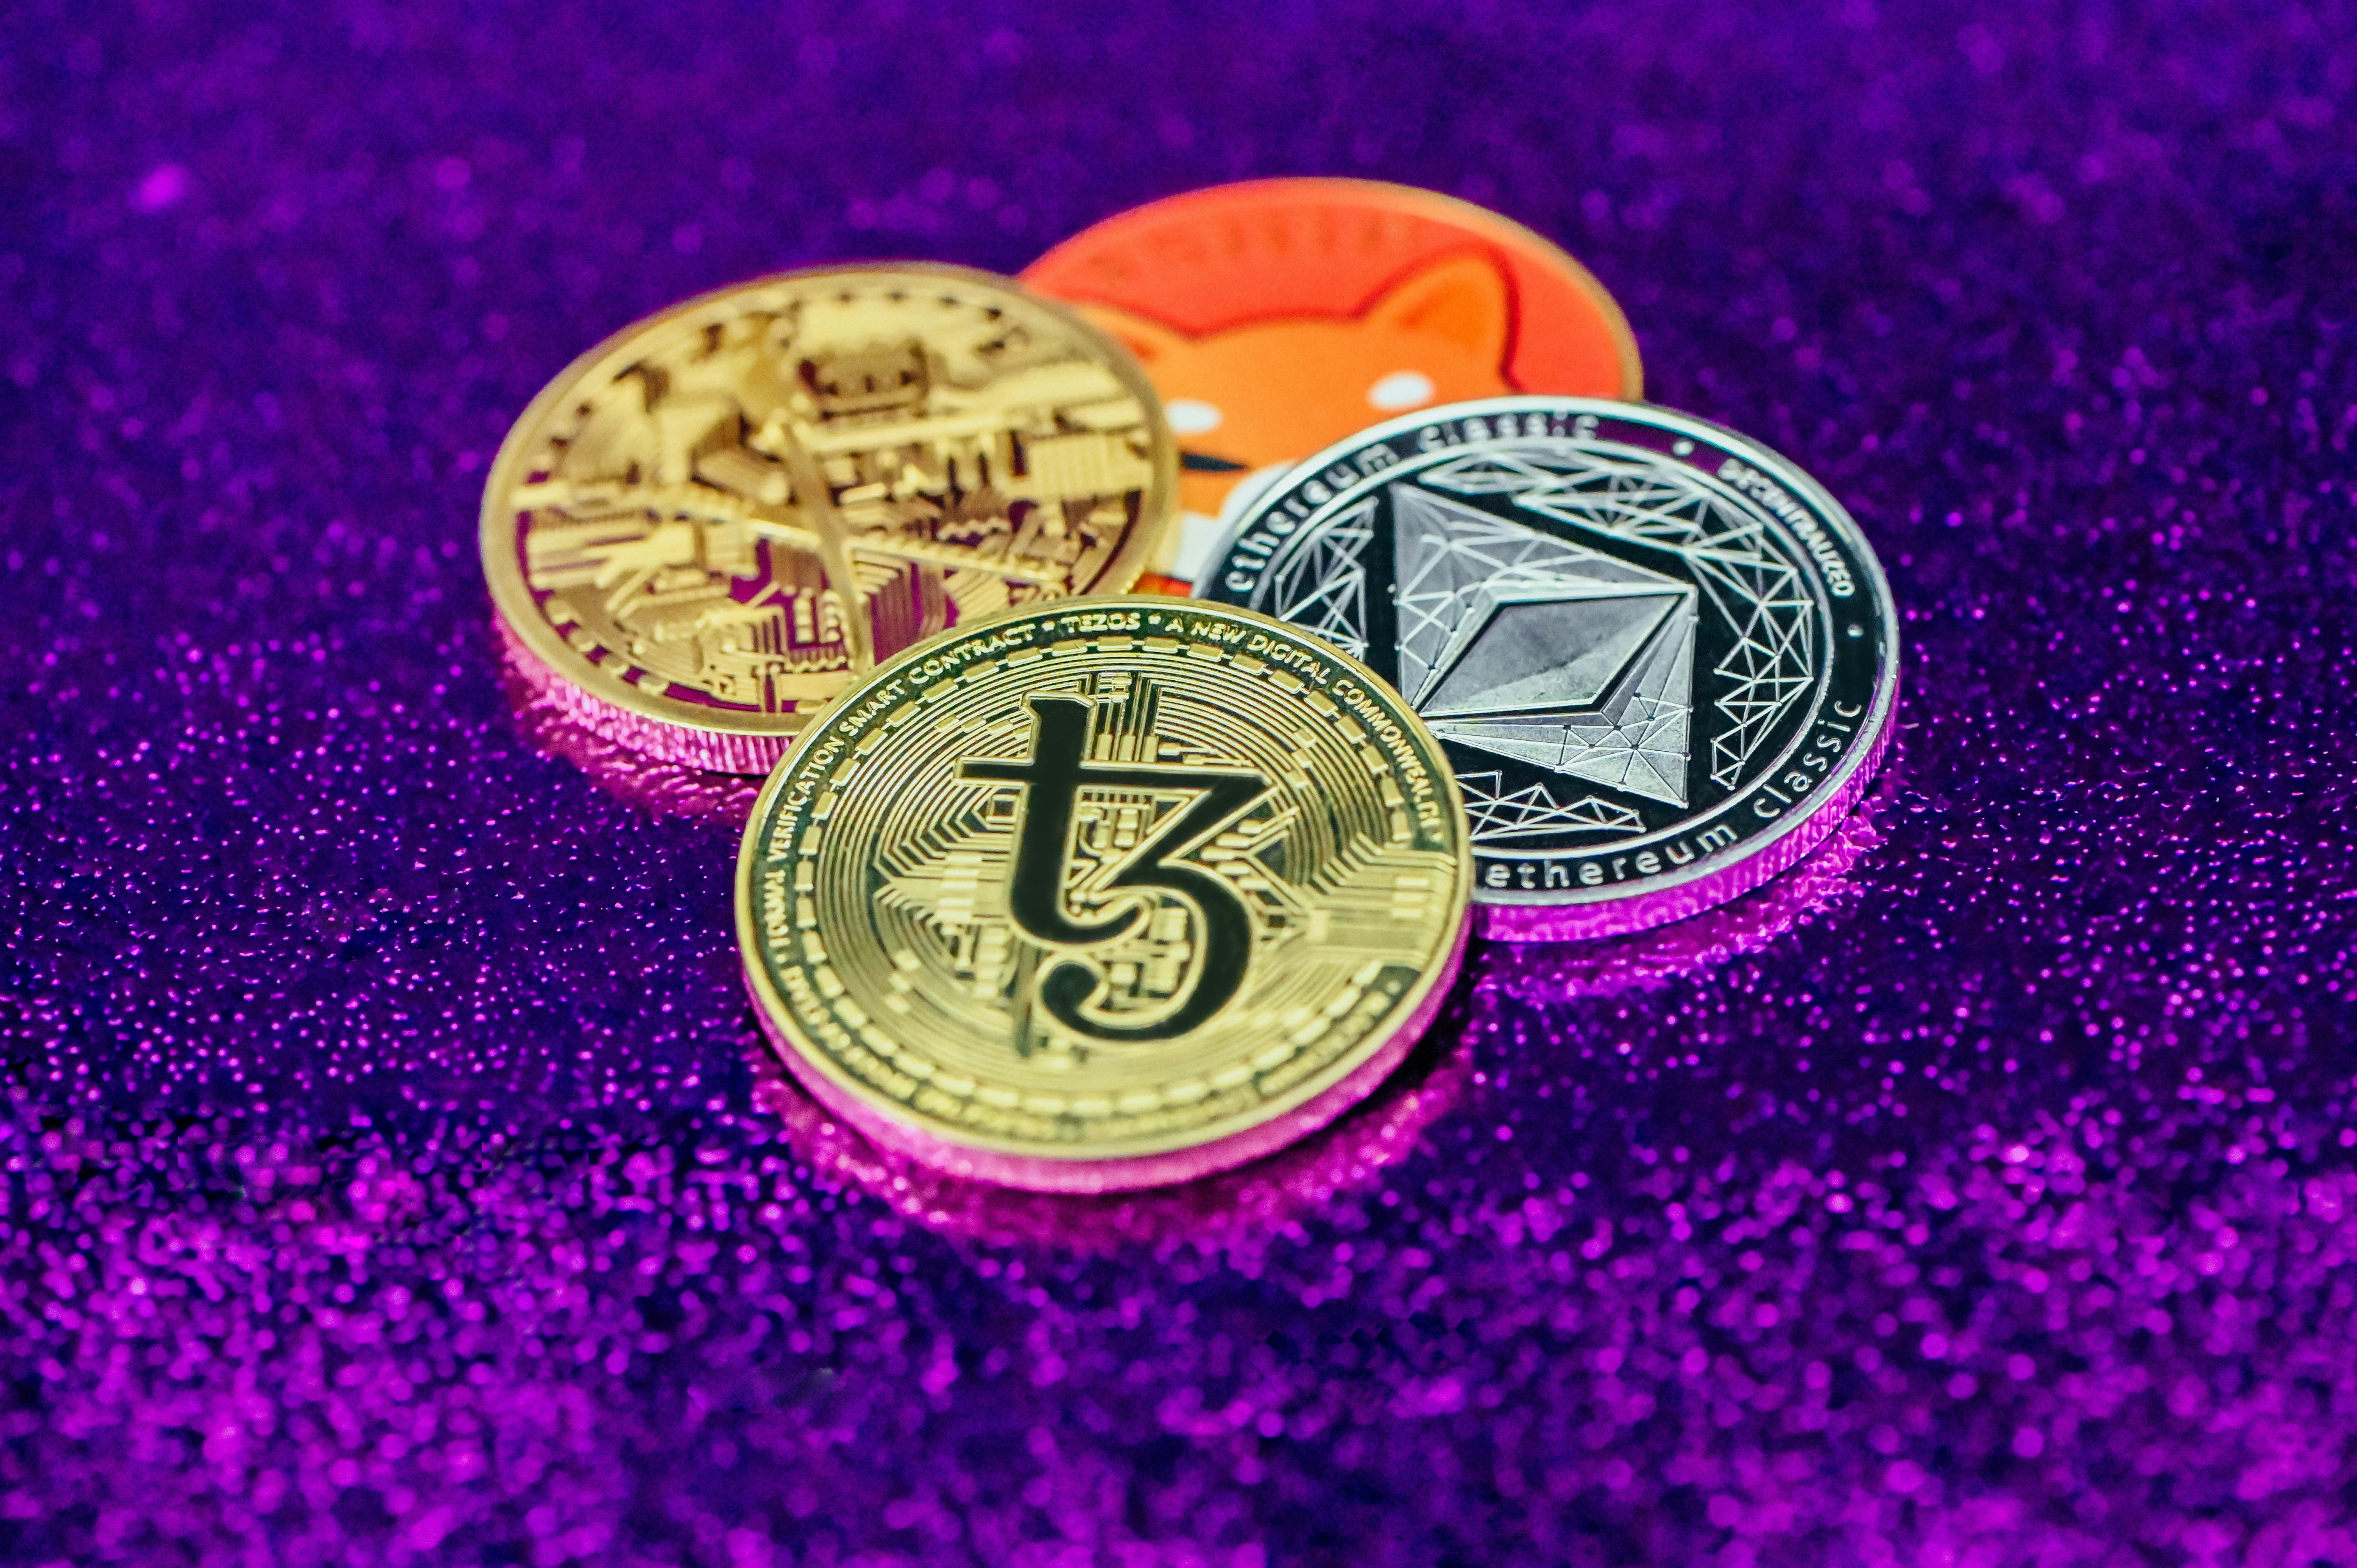 Variety coins on the sparkling purple fabric